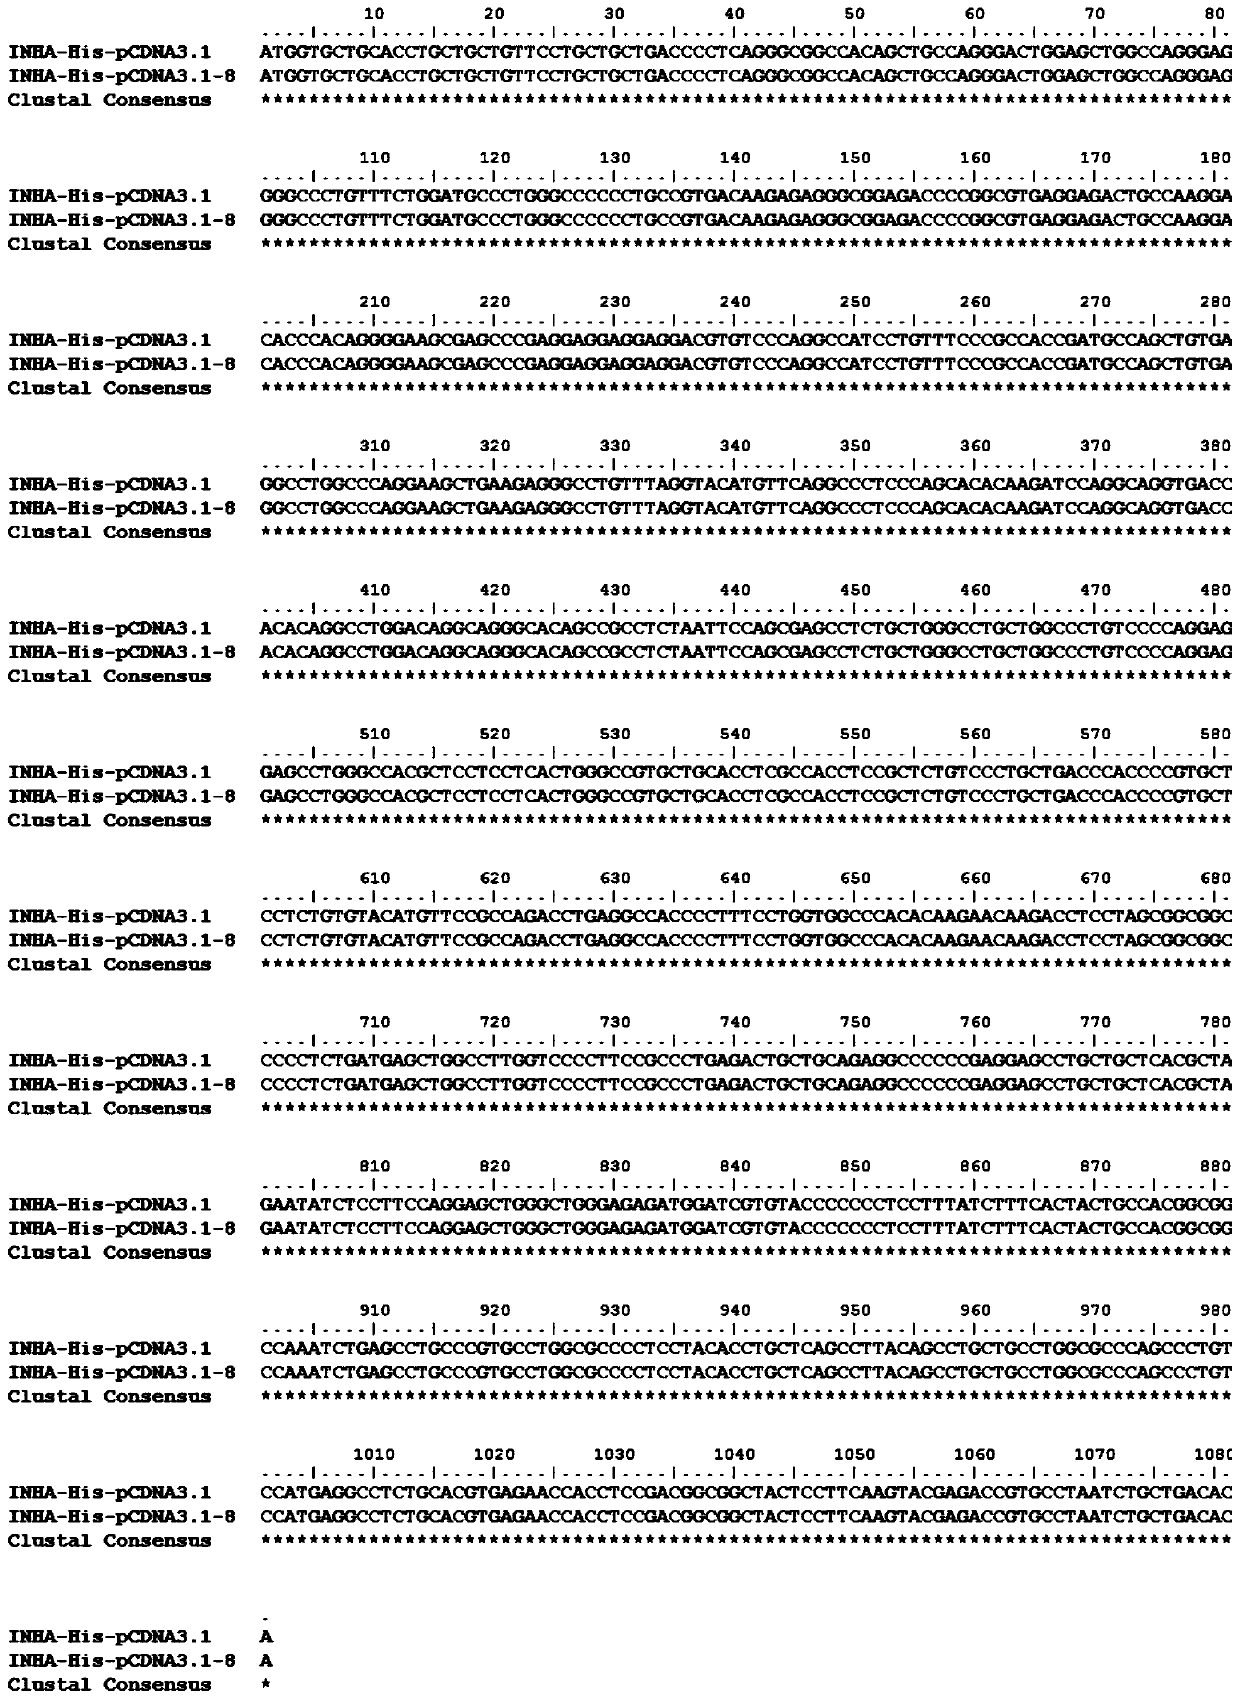 Nucleotide sequence of human inhibin A and recombinant expression method for human inhibin A